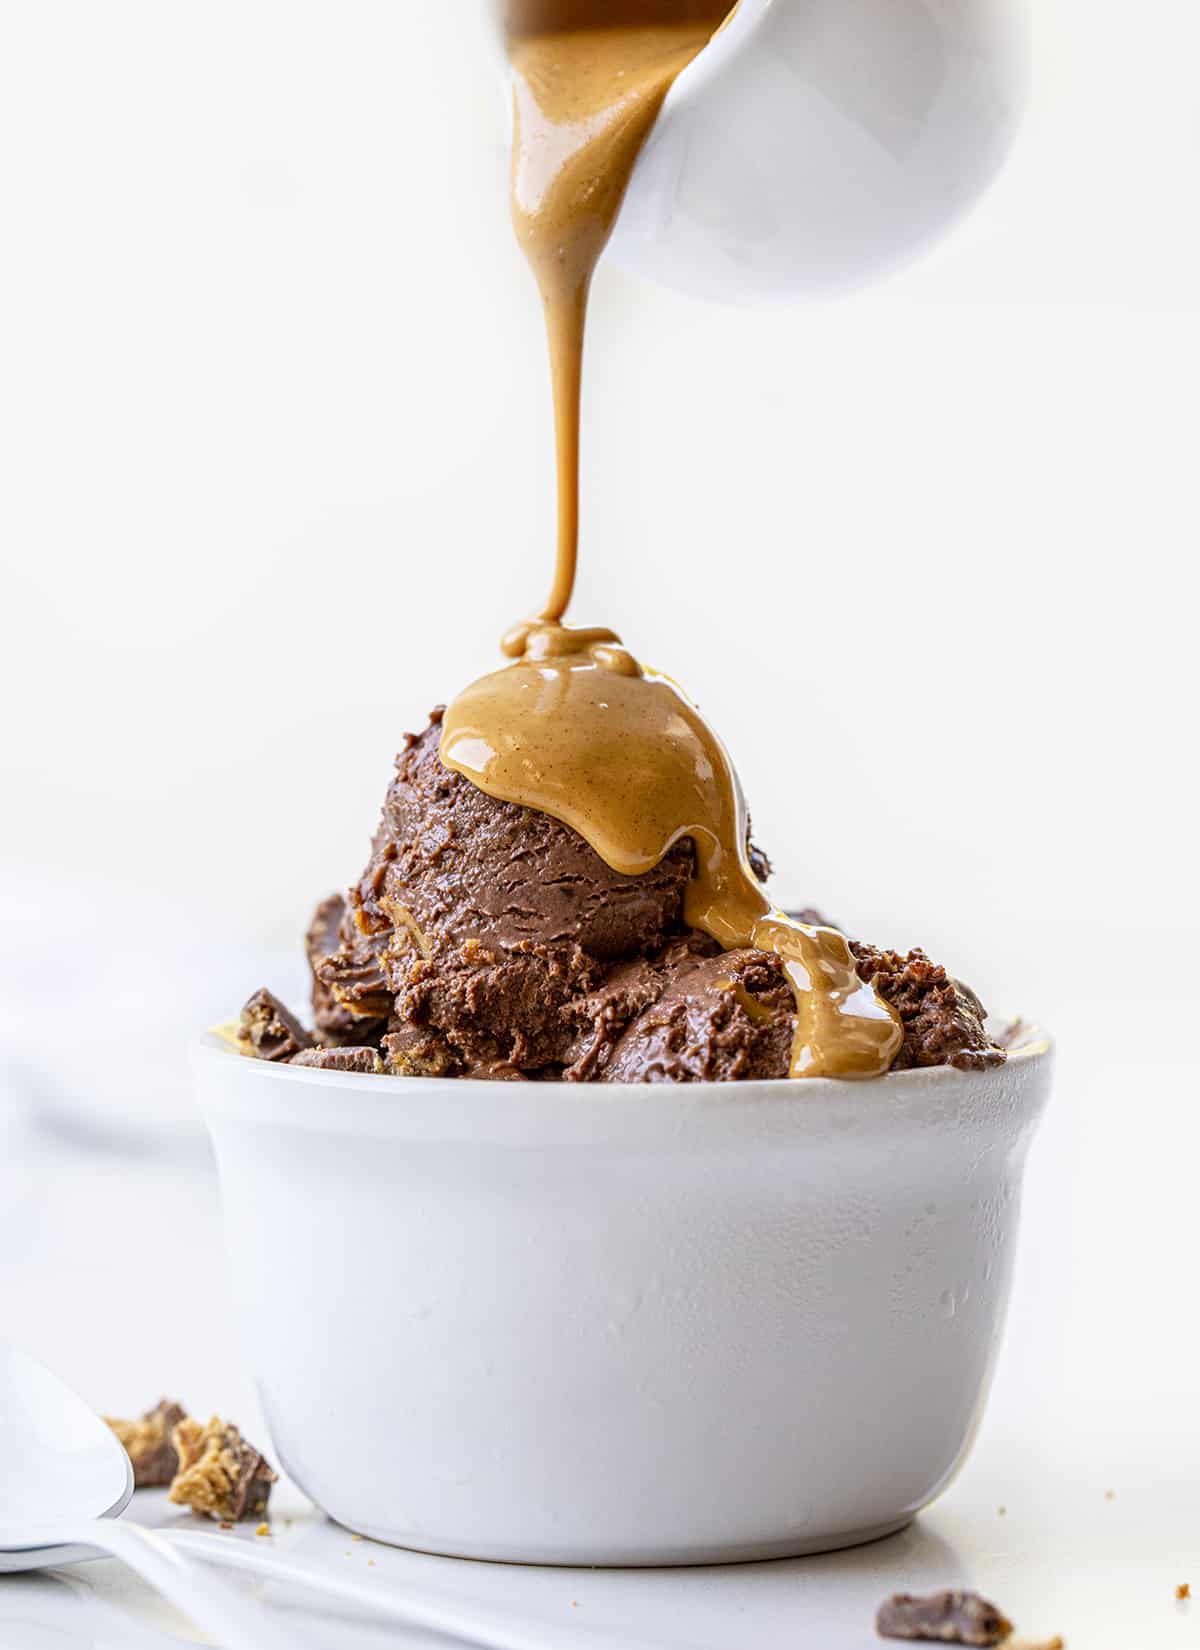 Pouring Melted Peanut Butter over Chocolate Peanut Butter Ice Cream in a Bowl. Dessert, Ice Cream, Ice Cream recipes, No Churn Ice Cream Recipes, How to Make Chocolate Ice Cream, Chocolate Peanut Butter ice Cream, No Churn Chocolate Ice Cream, No Bake Desserts, Summer Desserts, Homemade Ice Cream, Homemade Chocolate Ice Cream, i am baker, iambaker